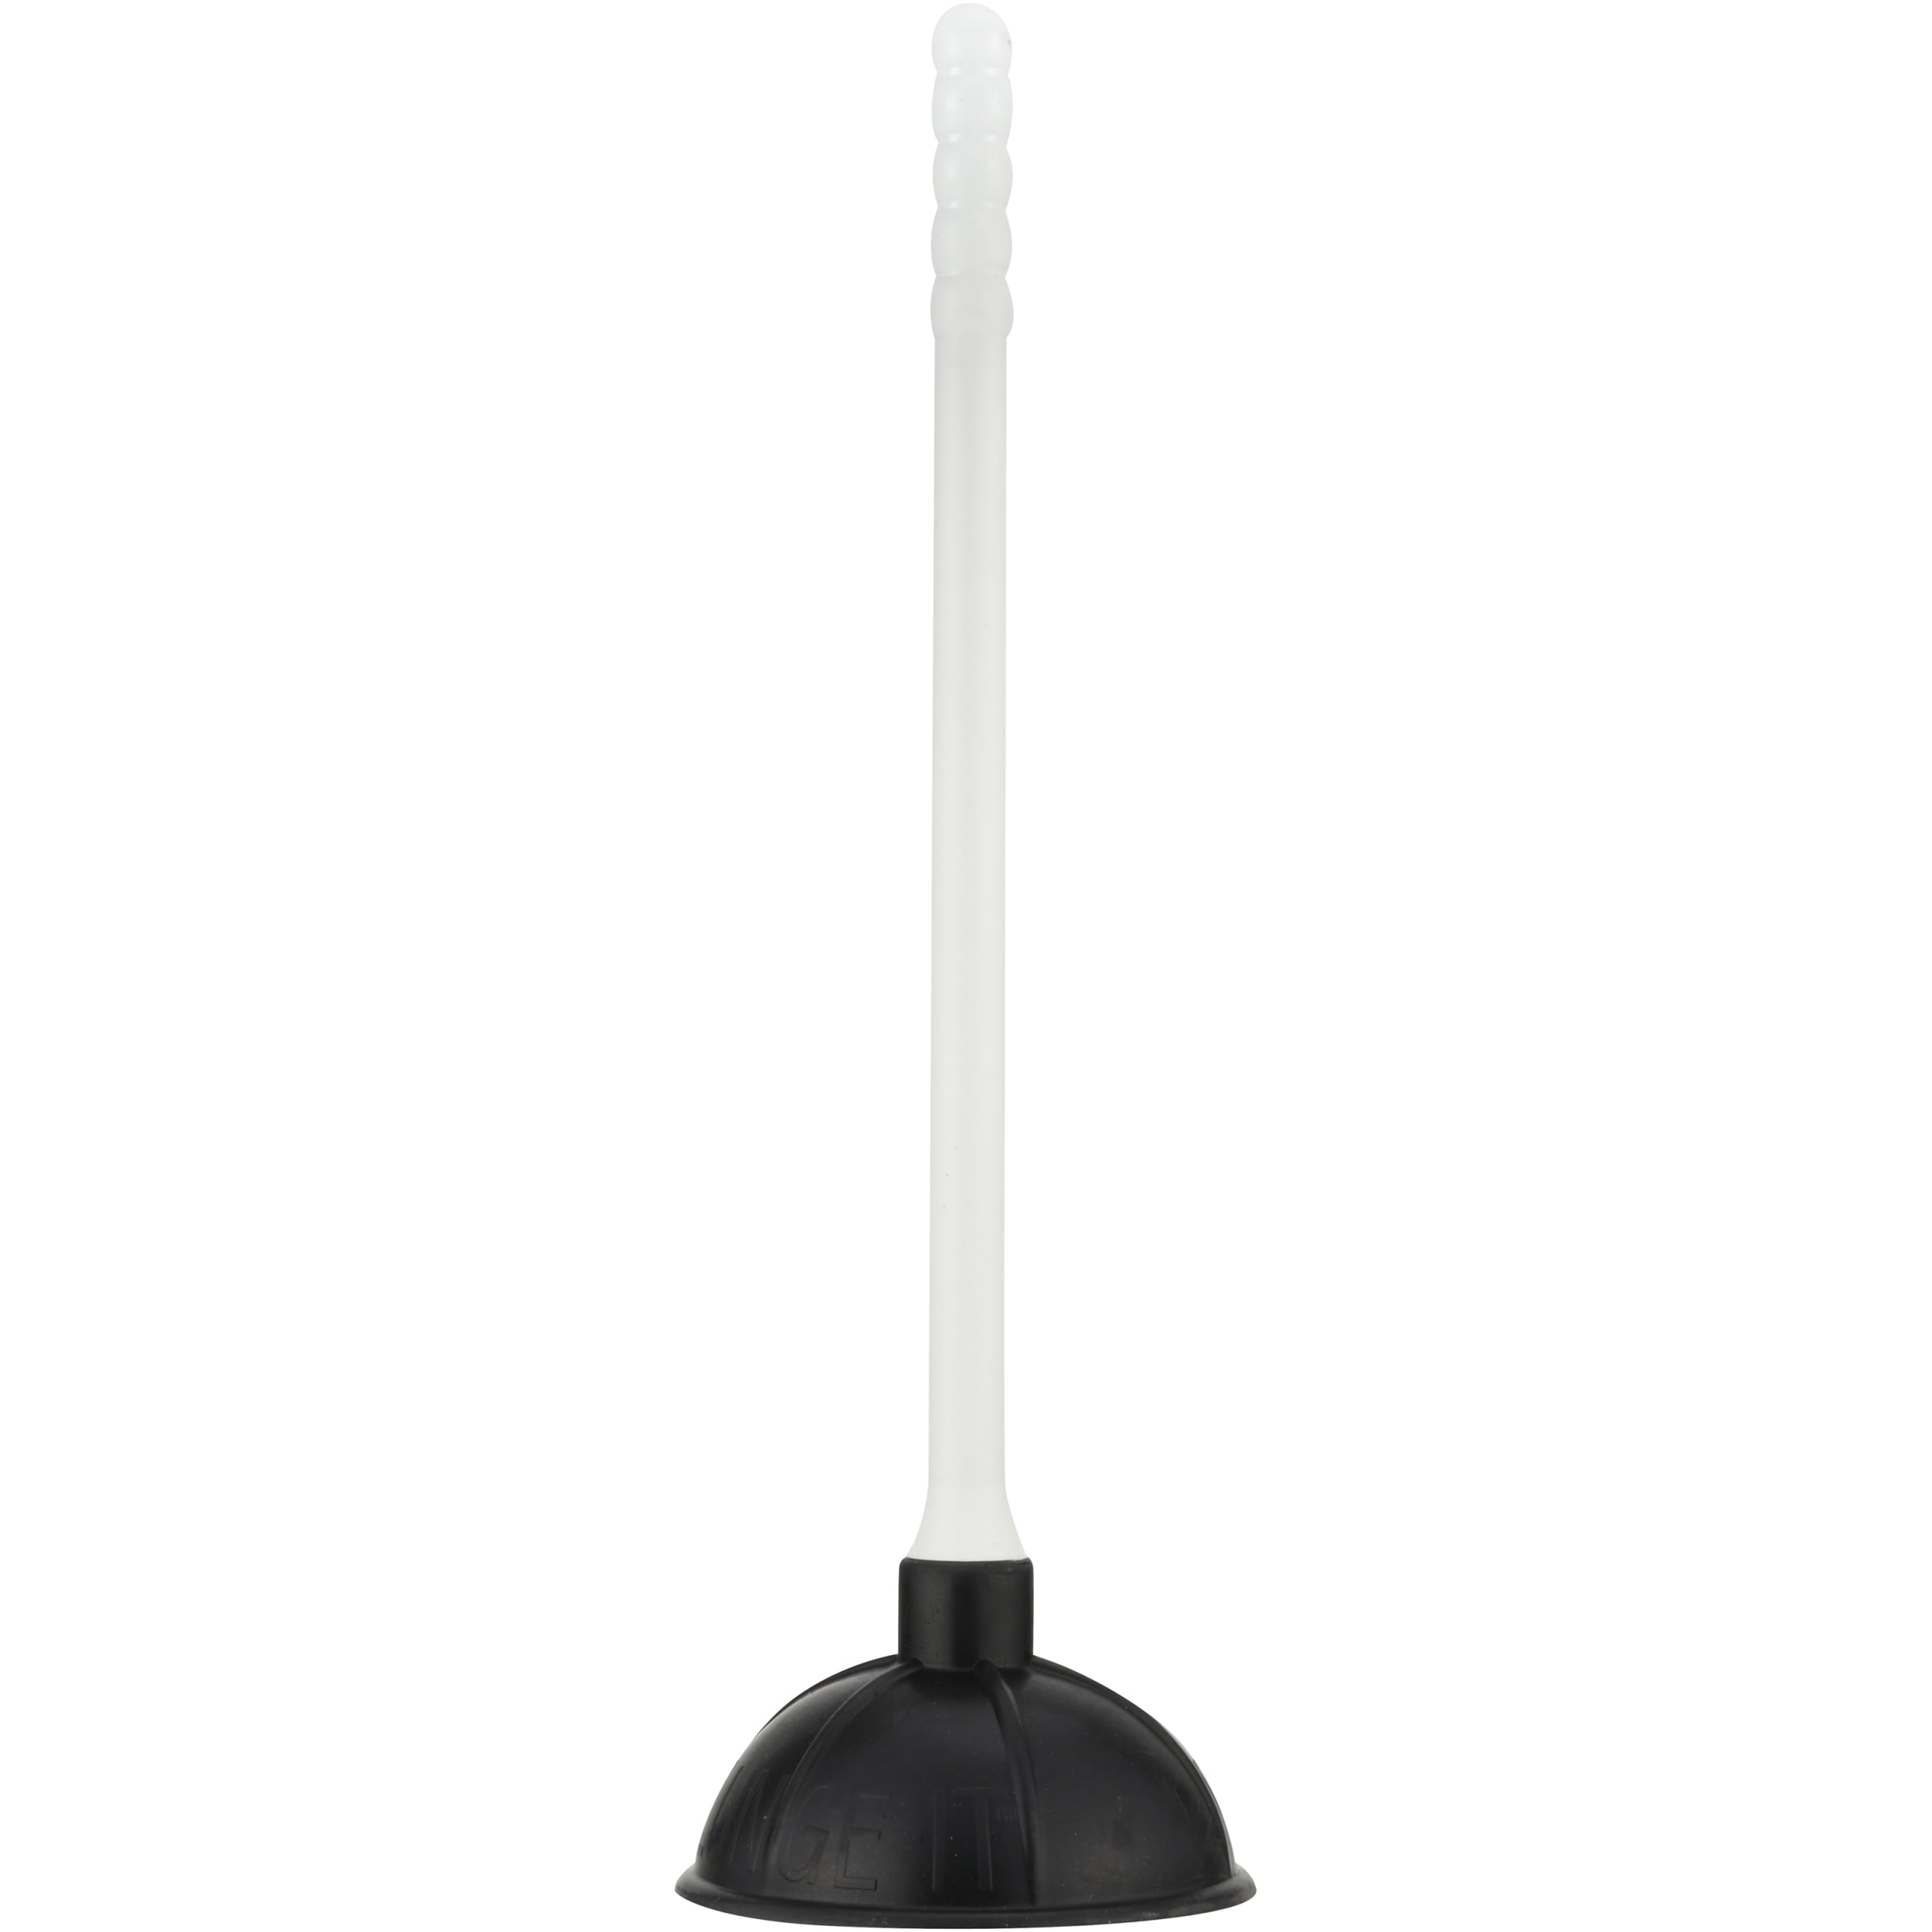 Cobra 207 Plunge-N-Store Plunger with 15-3/4 L in White Caddy